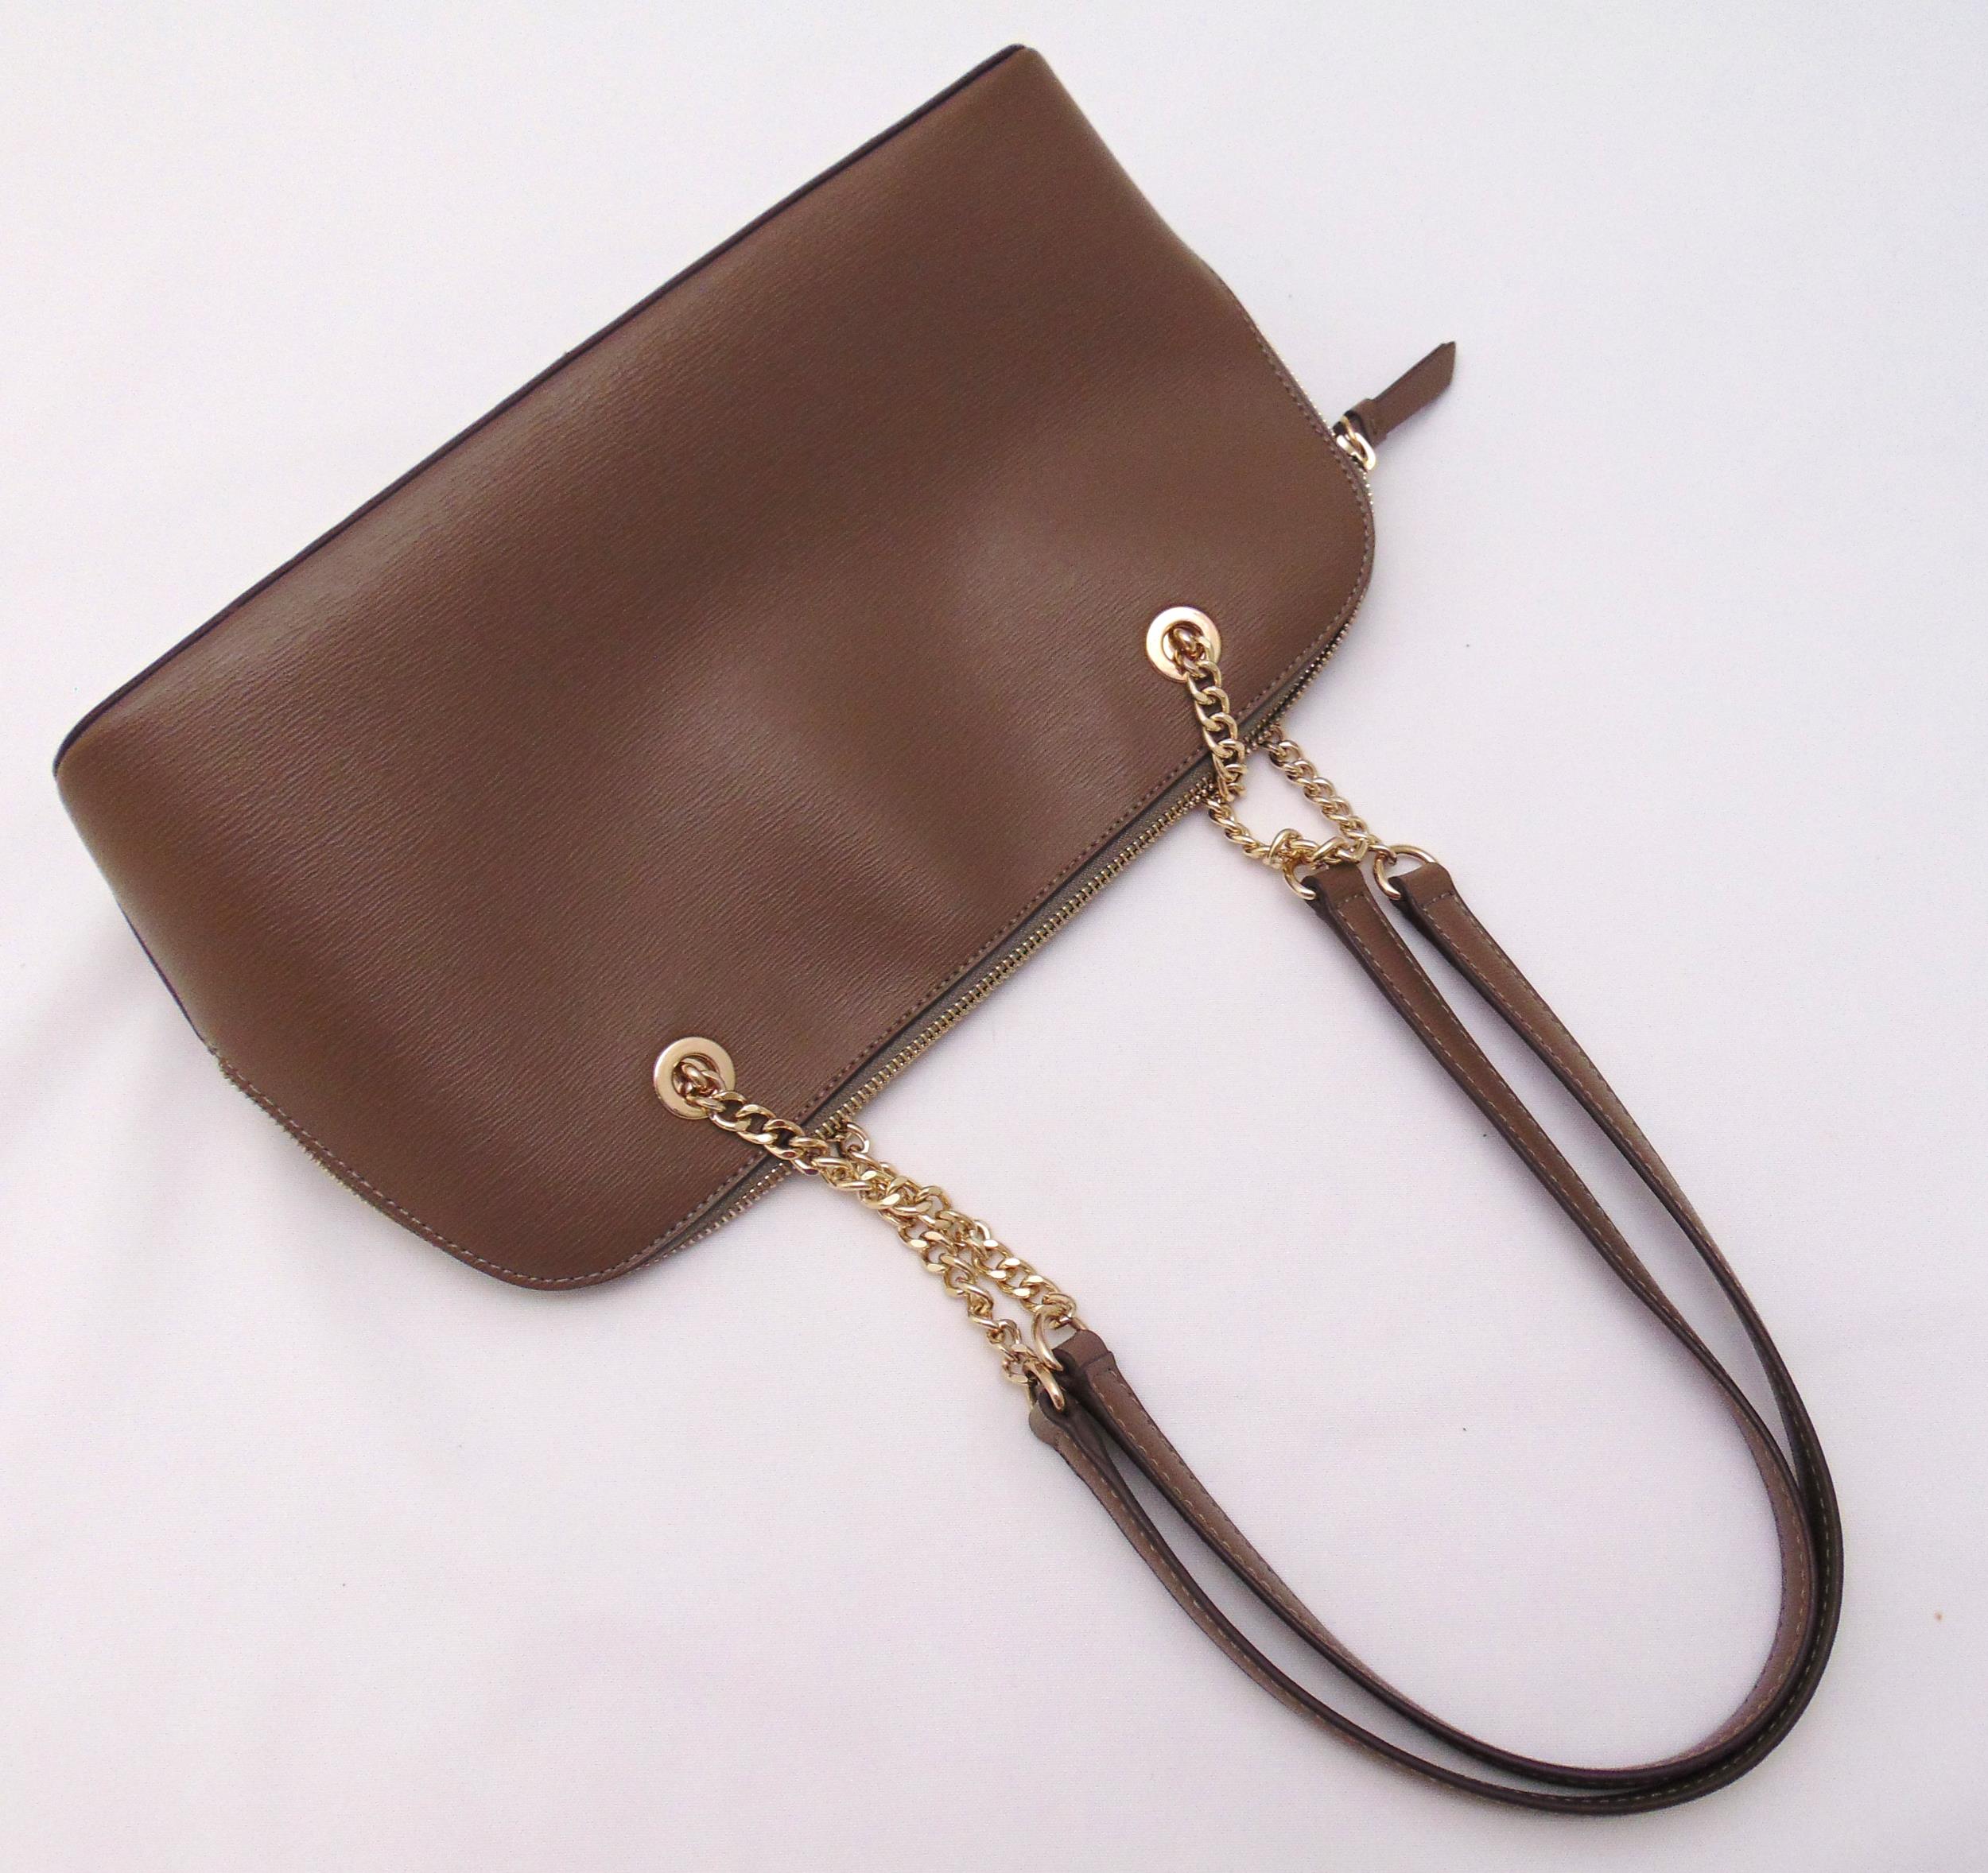 DKNY ladies taupe leather handbag with strap handle - Image 3 of 4